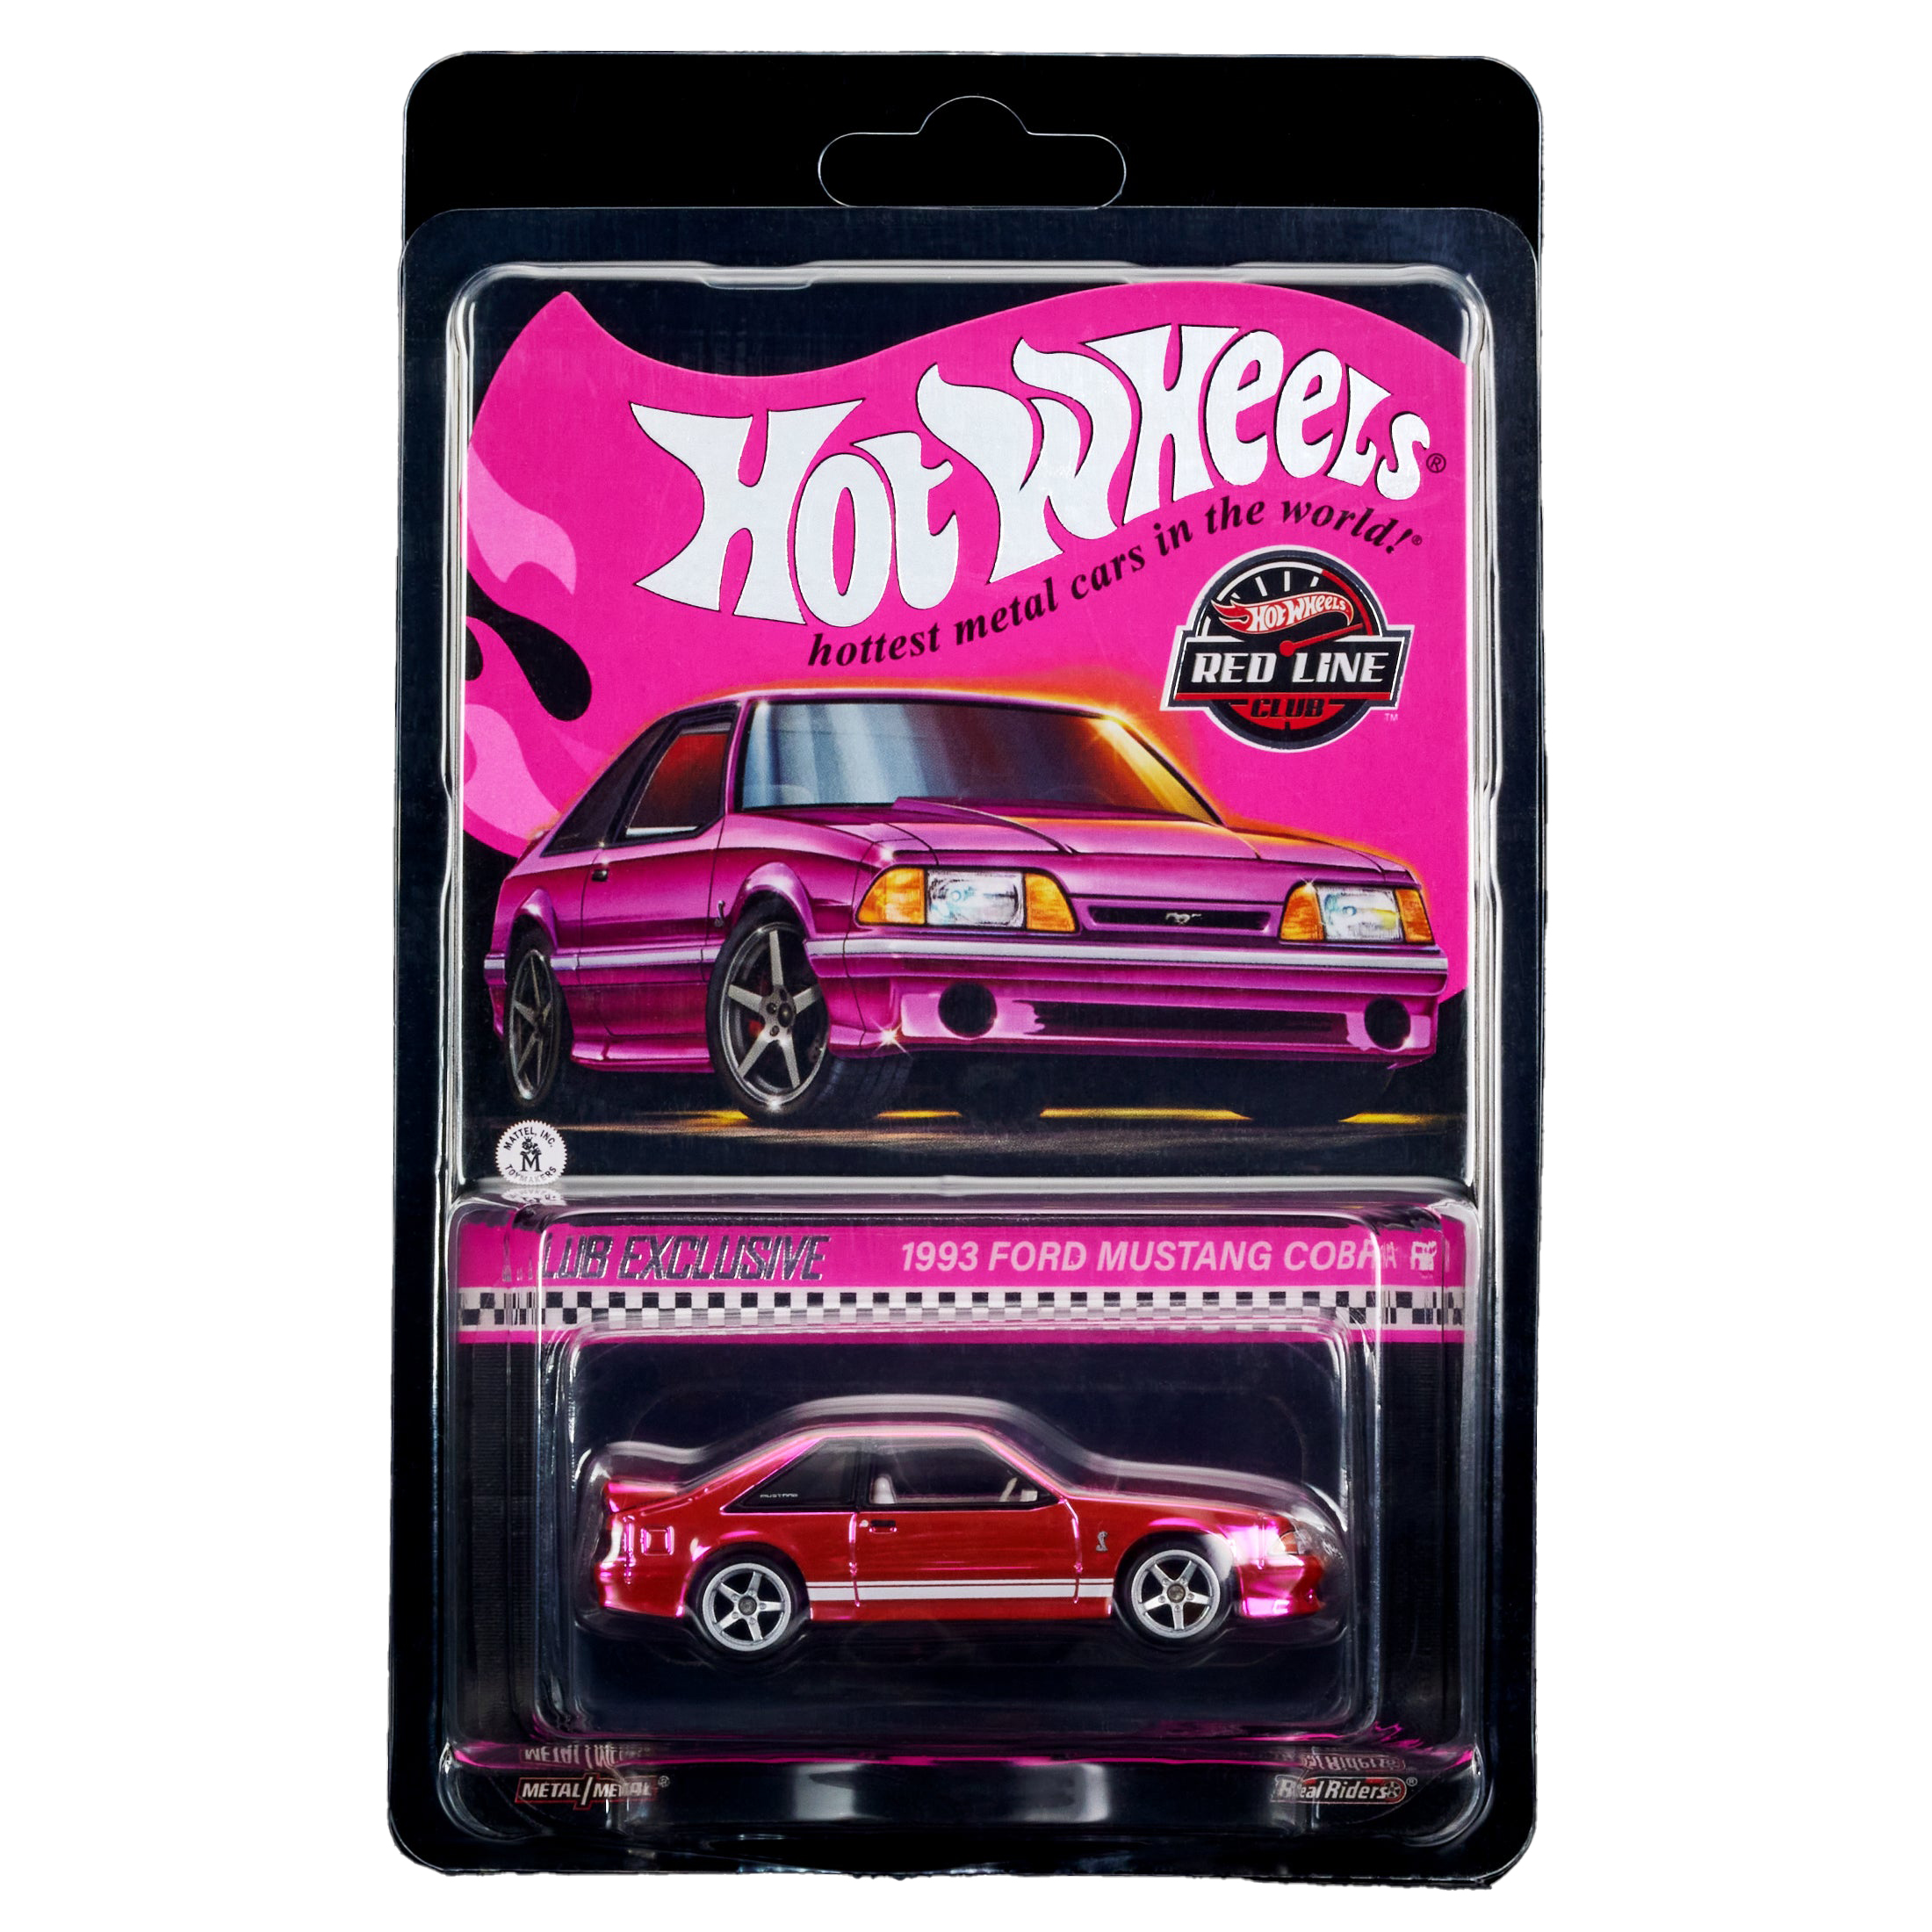 Hot Wheels RLC Exclusive Pink Edition 1962 Ford F100 - JP